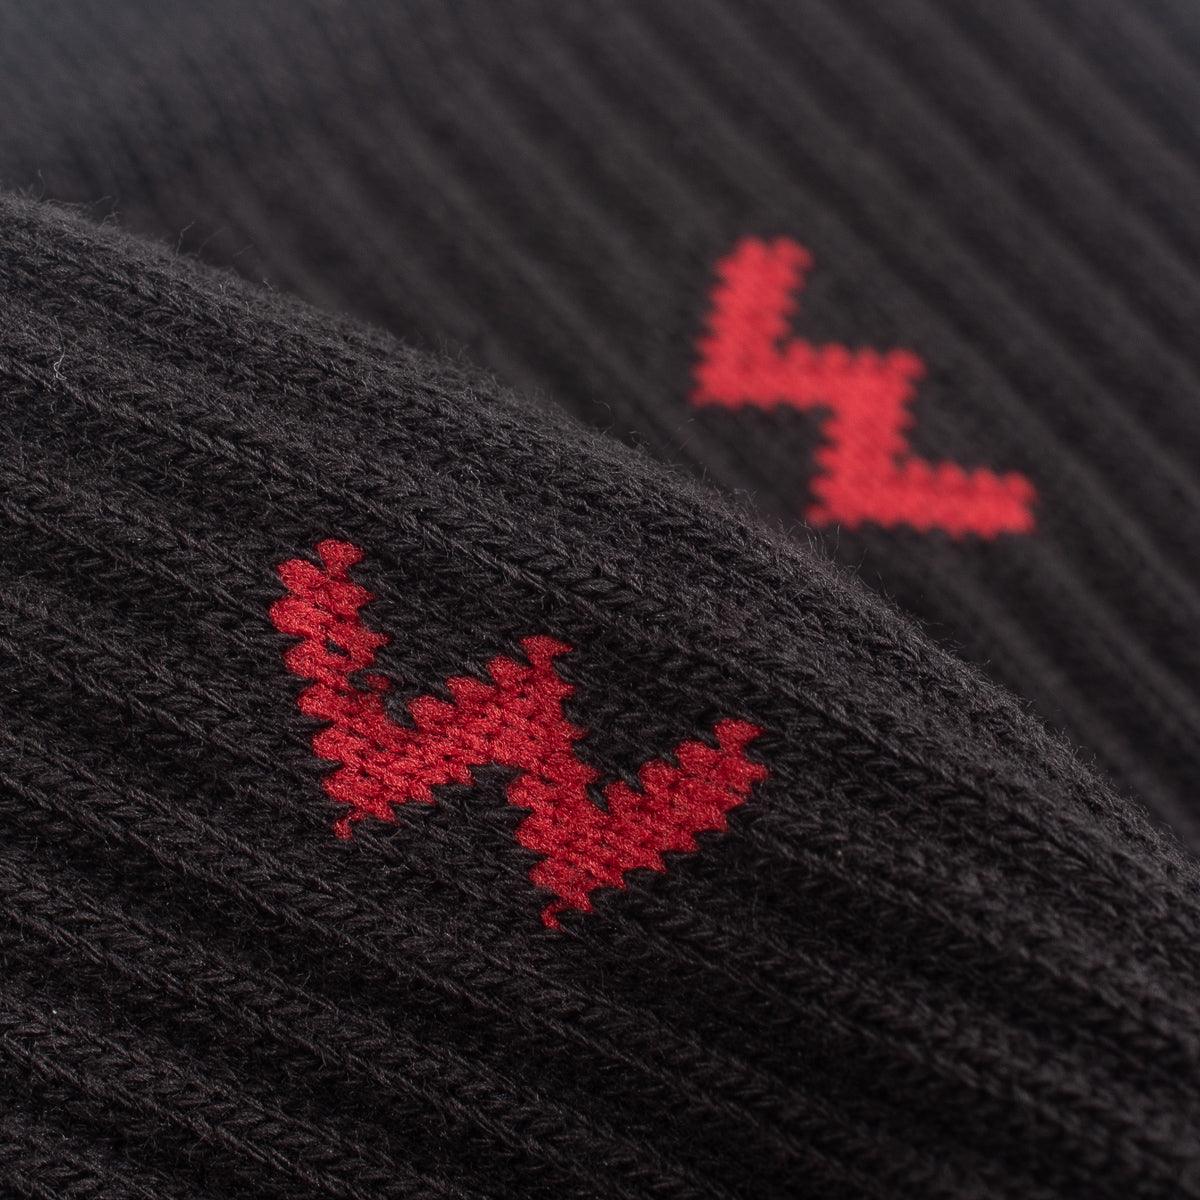 Image showing the IHG-030-BLK - Iron Heart Boot Socks - Black which is a Socks described by the following info Footwear, Iron Heart, Released, Socks and sold on the IRON HEART GERMANY online store